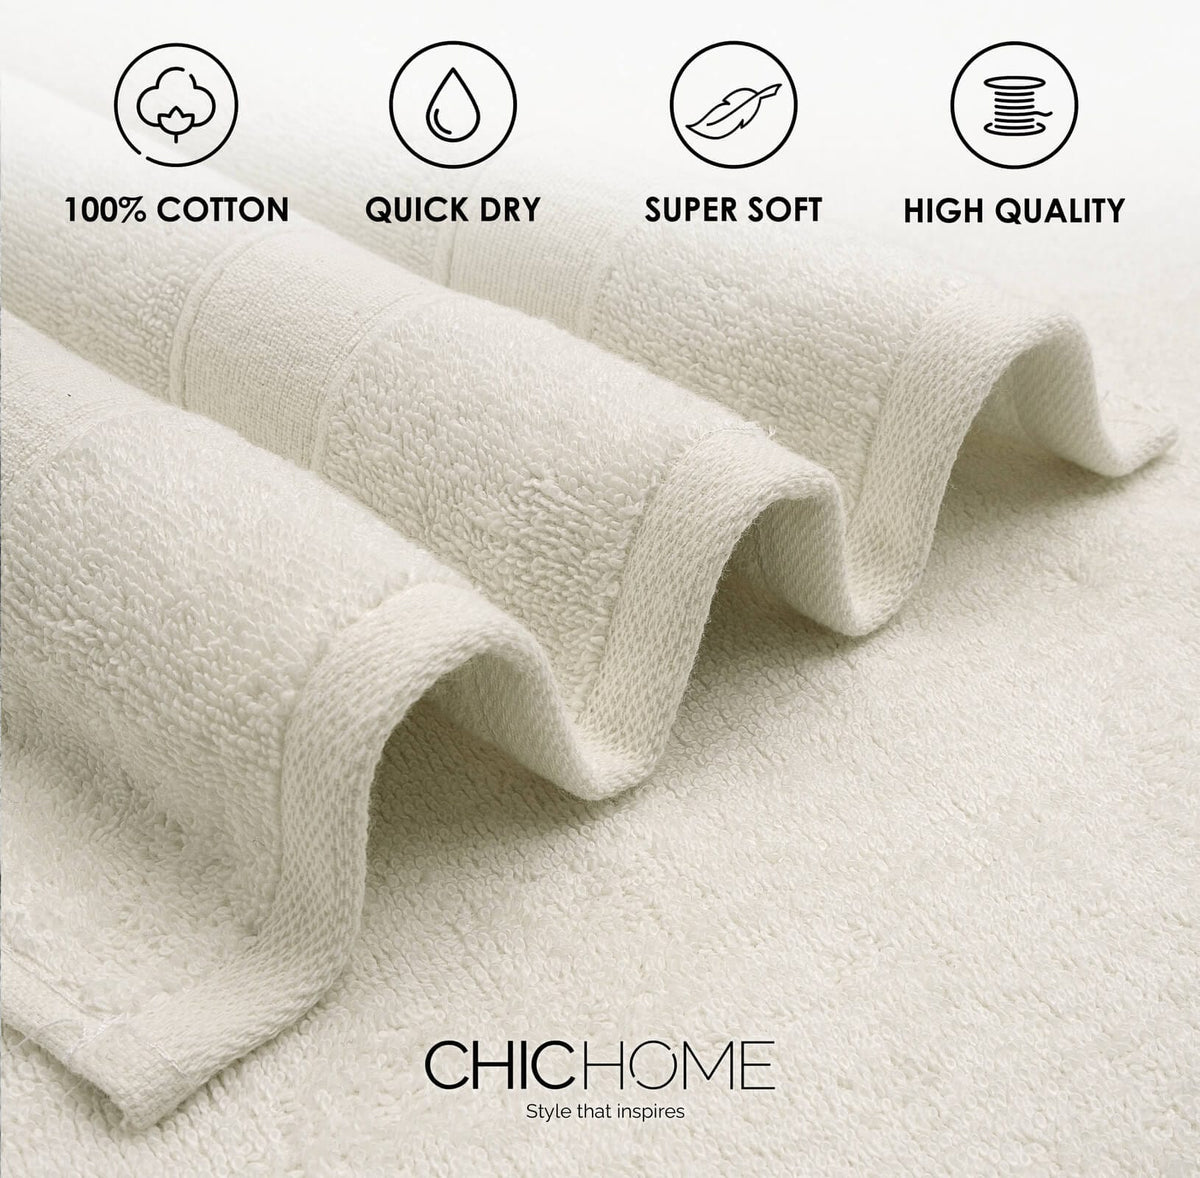 100% Cotton Luxury Hotel Hand Towels (2 pack) – Down & Cotton